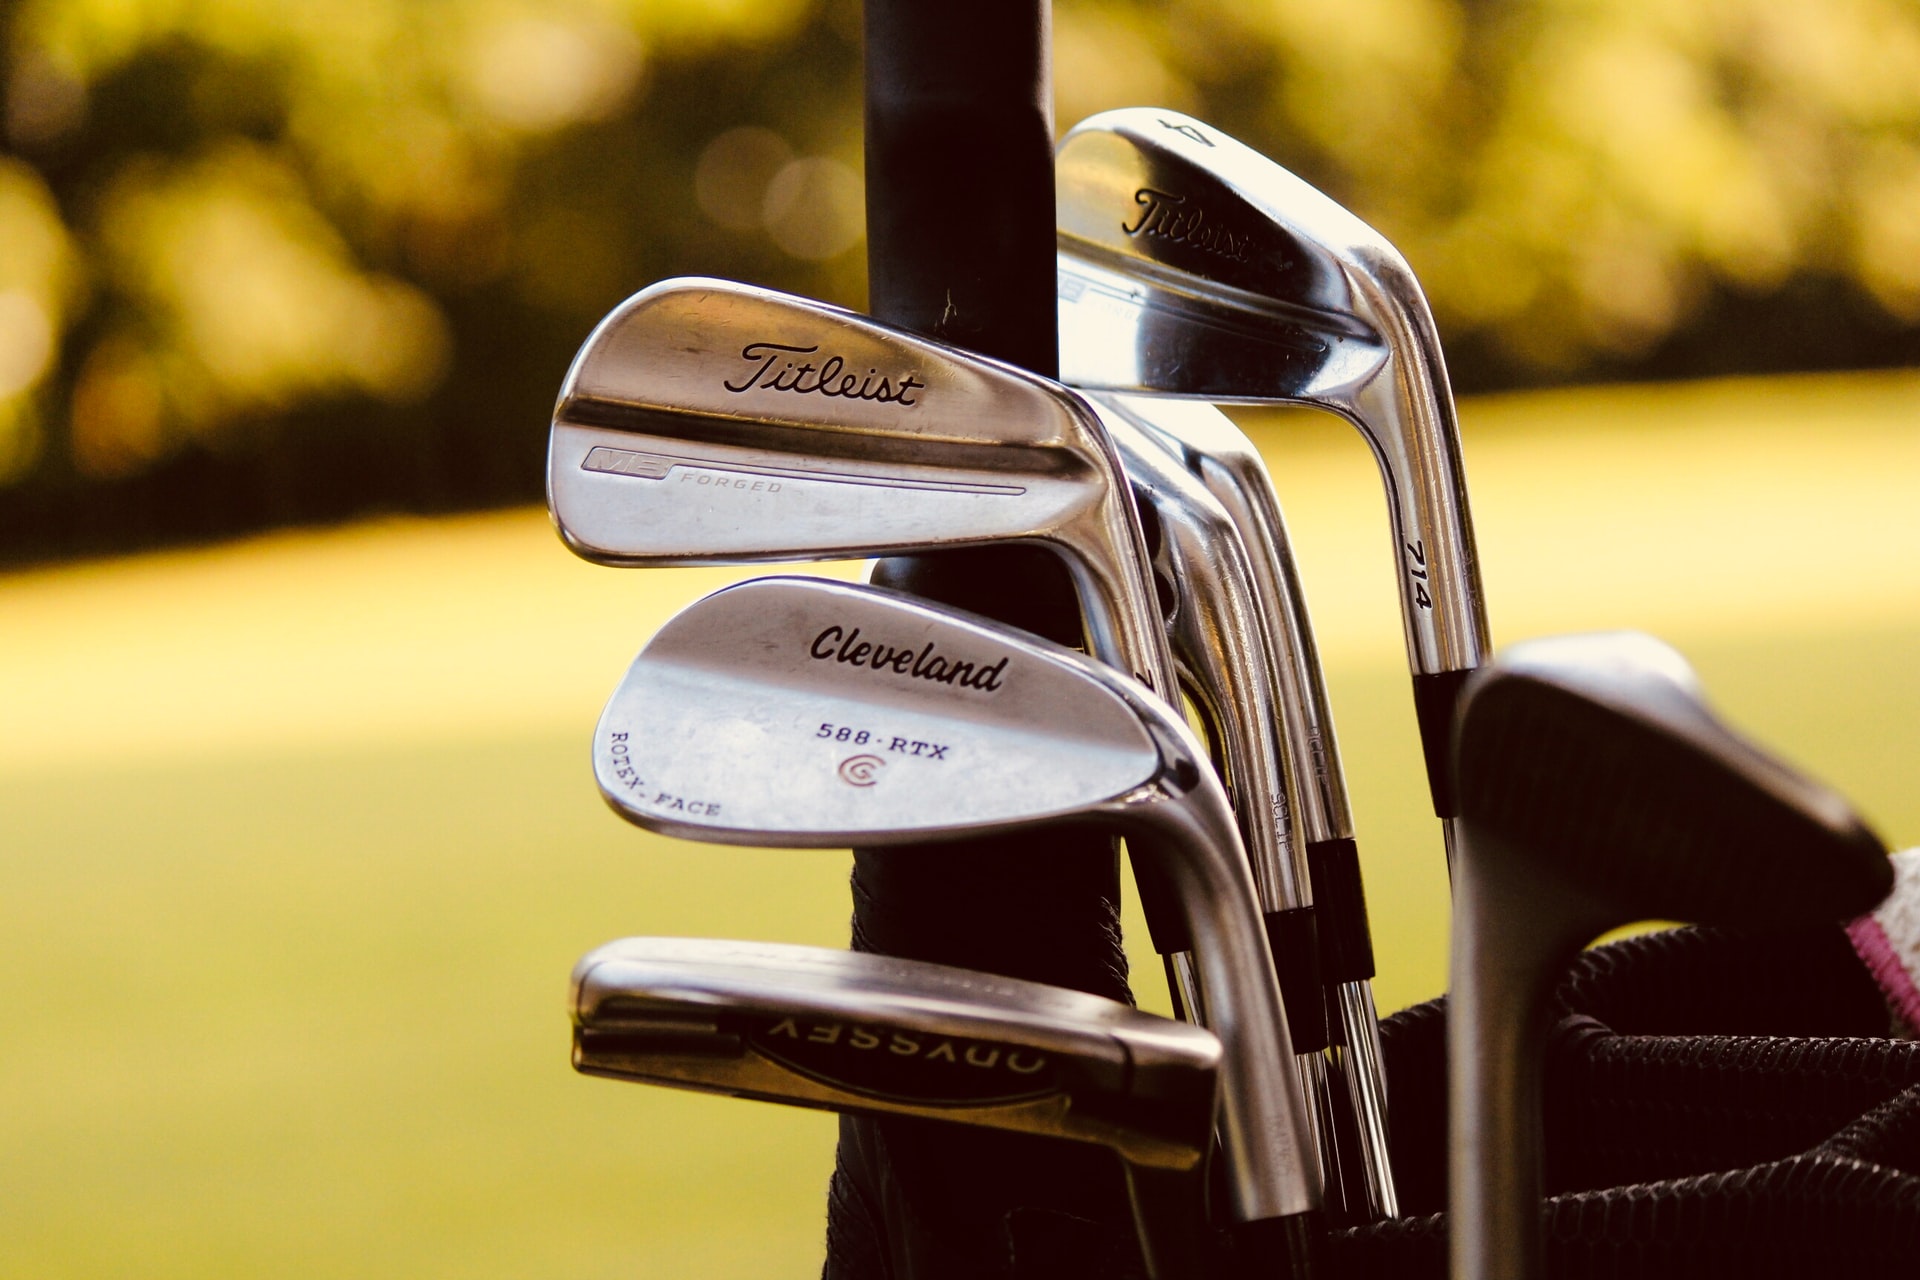 Golf clubs, representing a person taking advantage of a retiring allowance